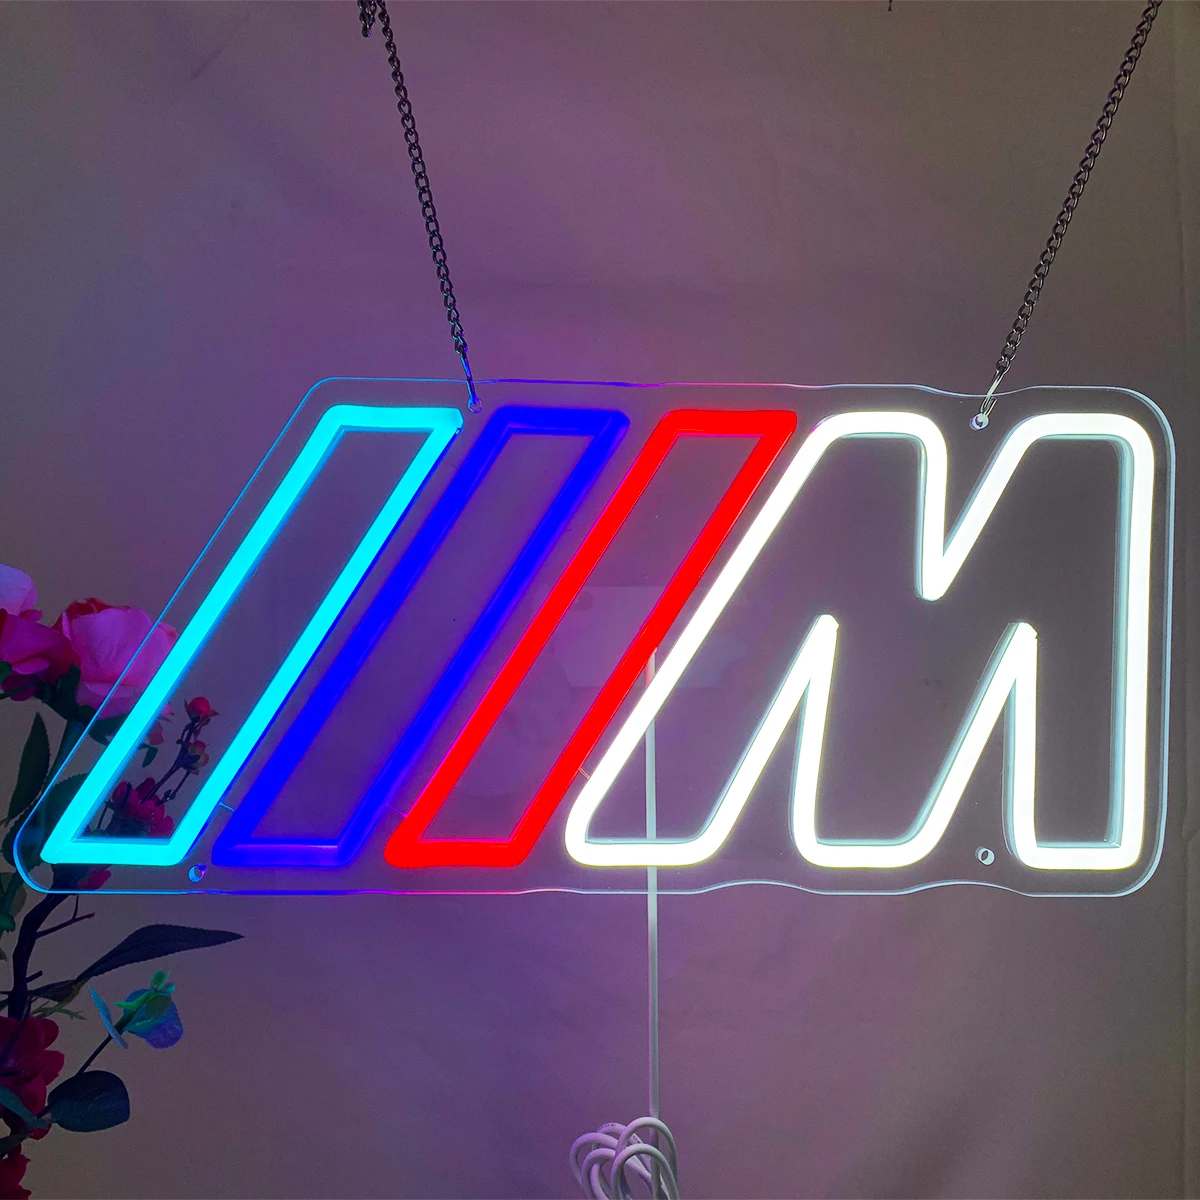 

Three-color bar m-shaped neon lights for the room garage party cool neon lighting decoration to create an atmosphere